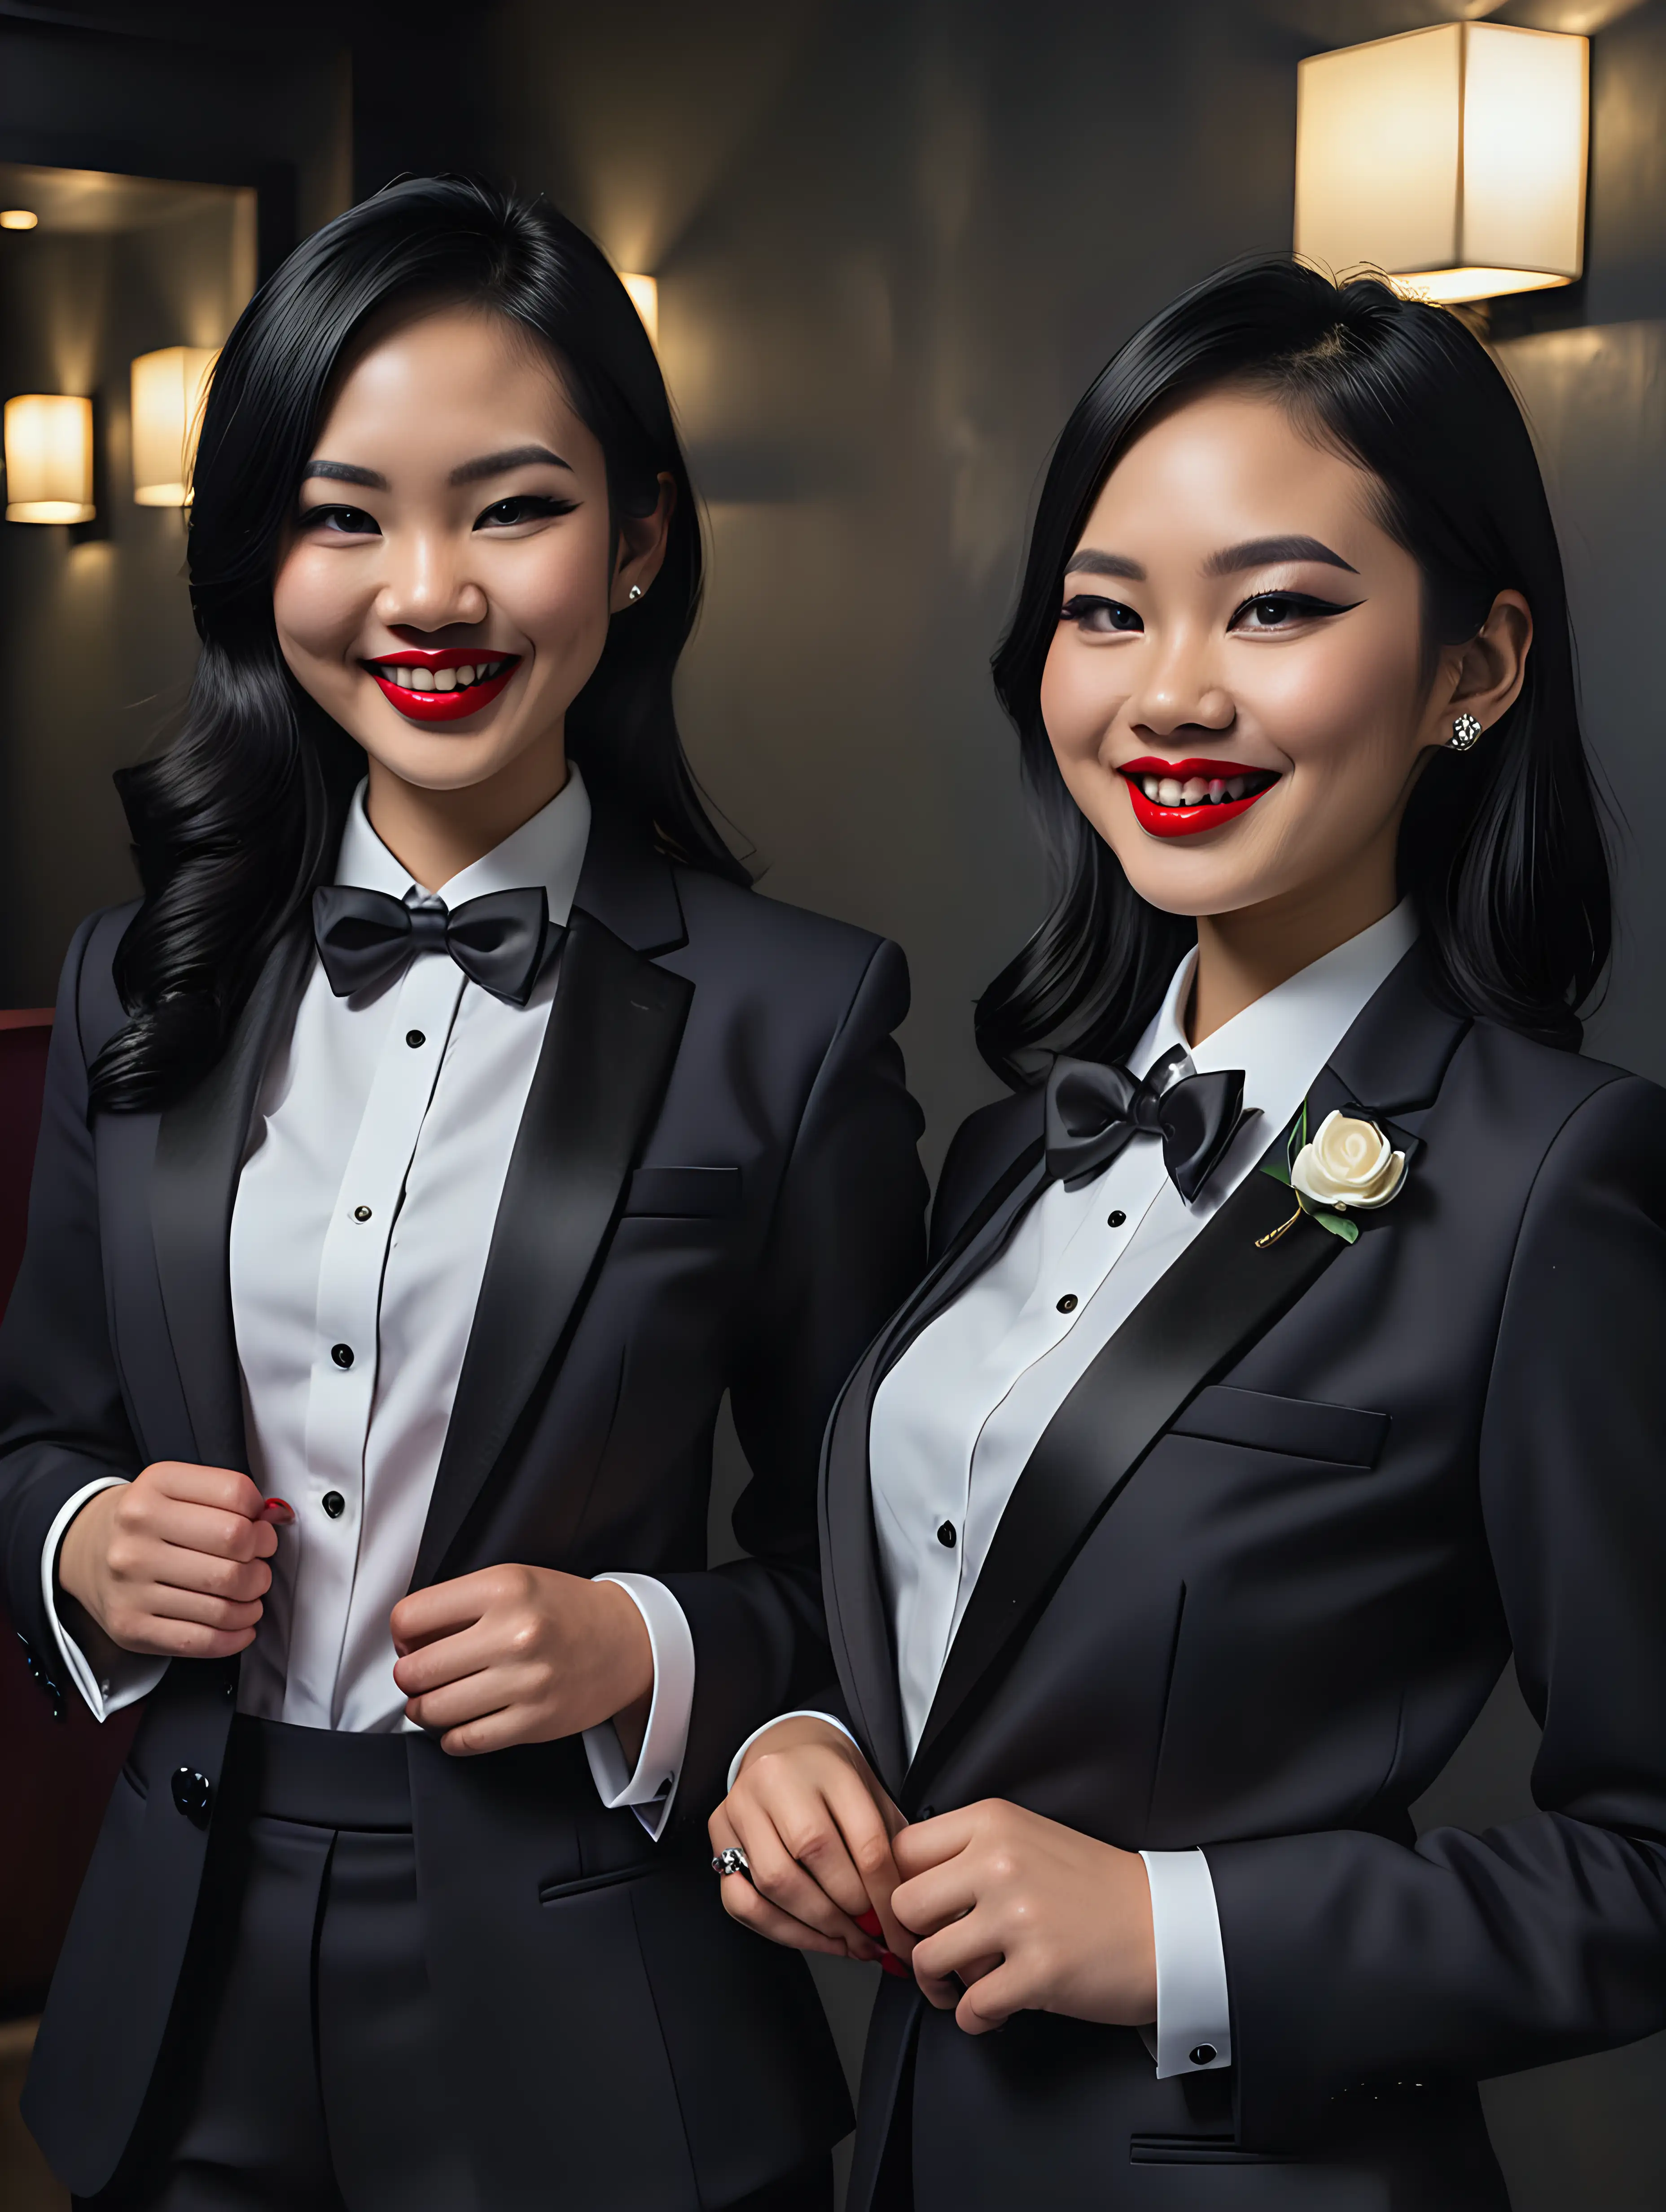 Two 30 year old smiling vietnamese womae with shoulder length black hair and lipstick wearing matching tuxedos with a black bow tie. (Their shirt cuffs have cufflinks). Their jackets have a corsage. Their jackets are not buttoned.  Their jackets are open. They are standing in a dark room.  